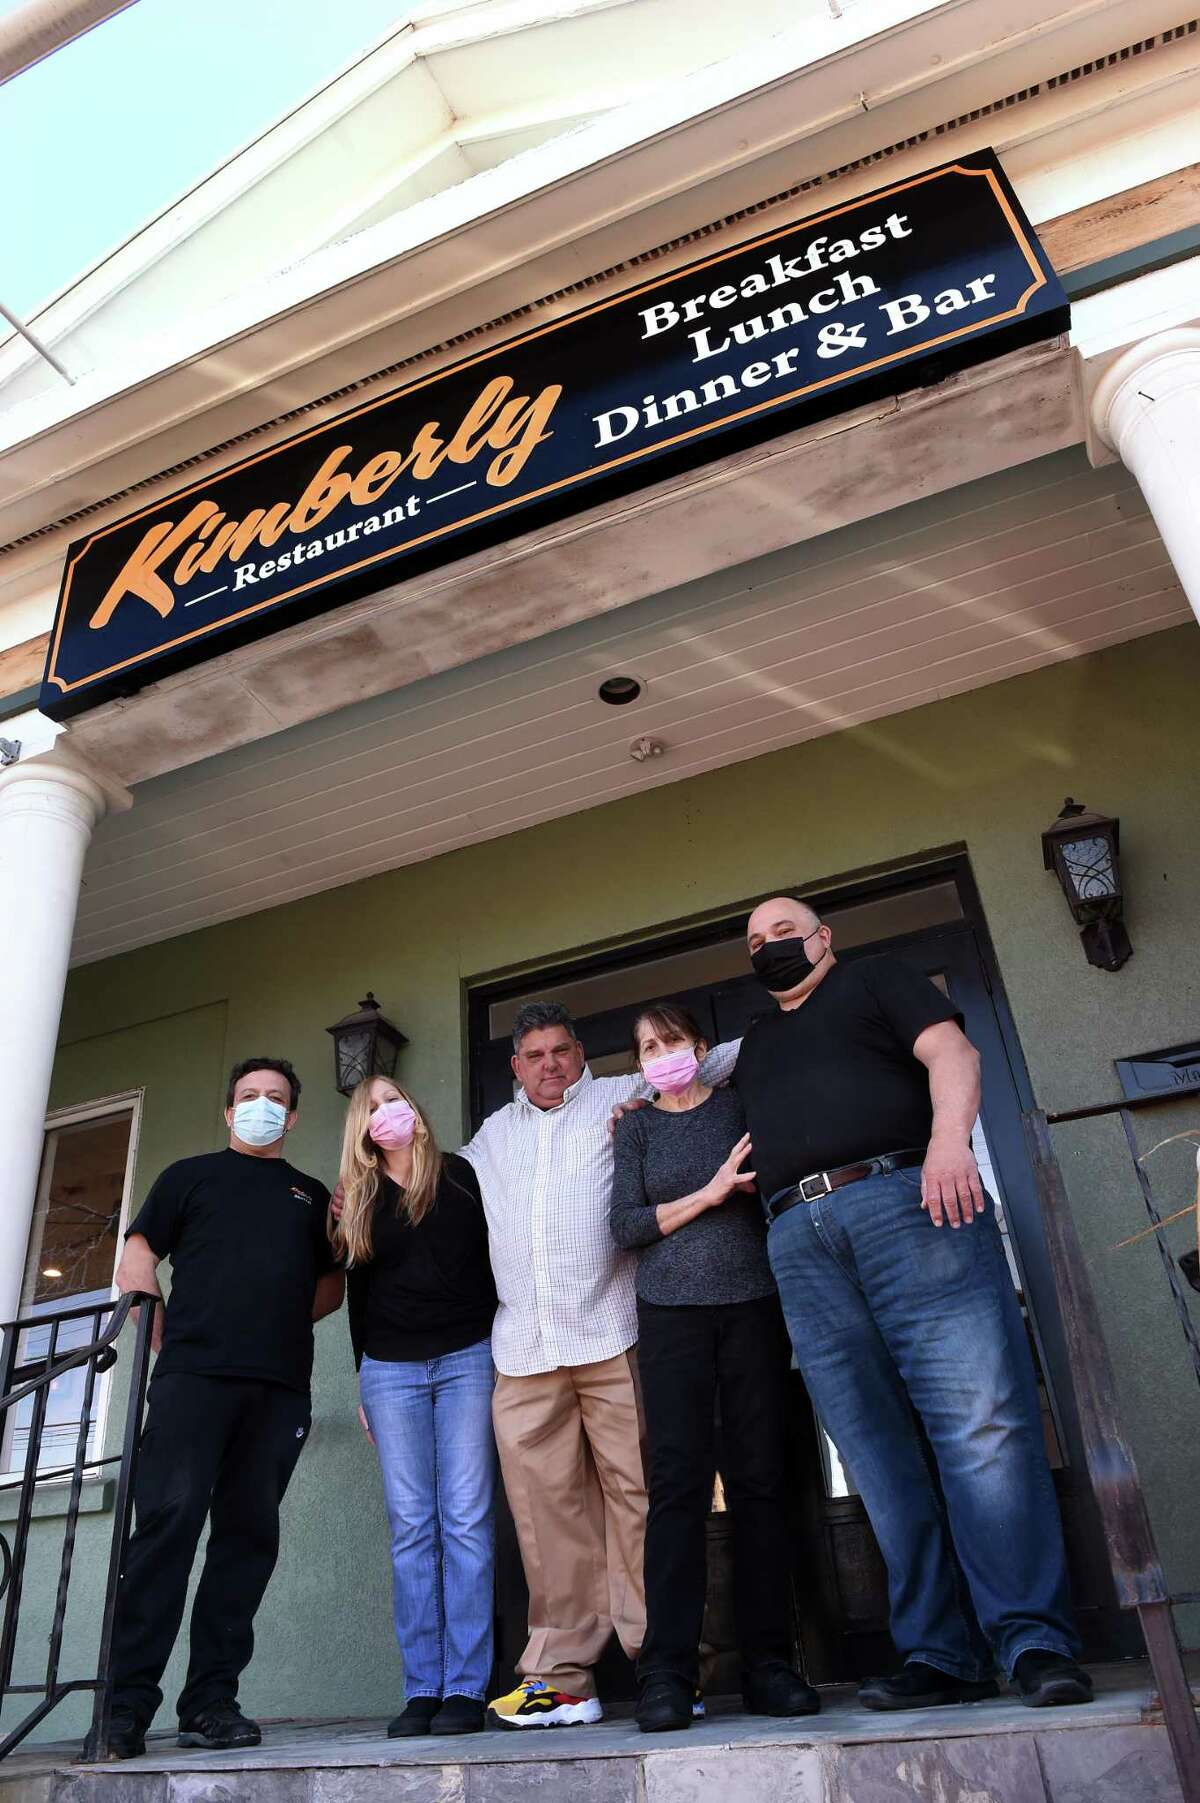 From left, chef Abraham Guney, Allison McNabb, builder Robert Altieri, Rena Tsopanides and her son, owner Timmy Tsopanides, photographed outside the Kimberly Restaurant in Milford March 19, 2021. The restaurant will reopen on Tuesday March 23rd following repairs from flood damage. Roberts Mechanical Services performed the renovations.